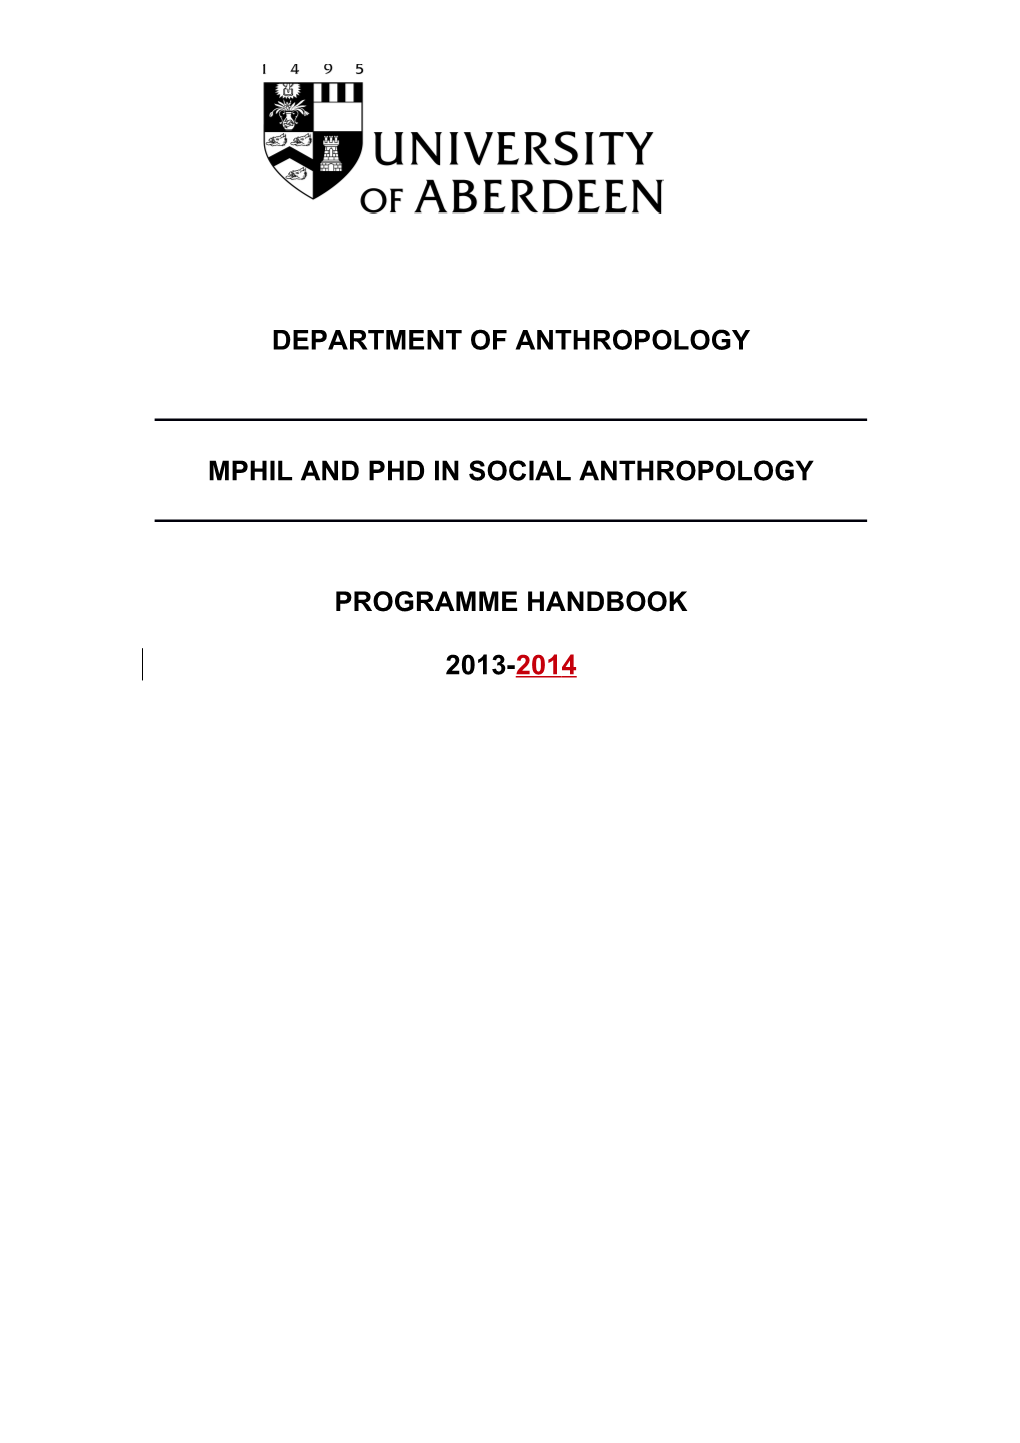 Mphil and Phd in Social Anthropology